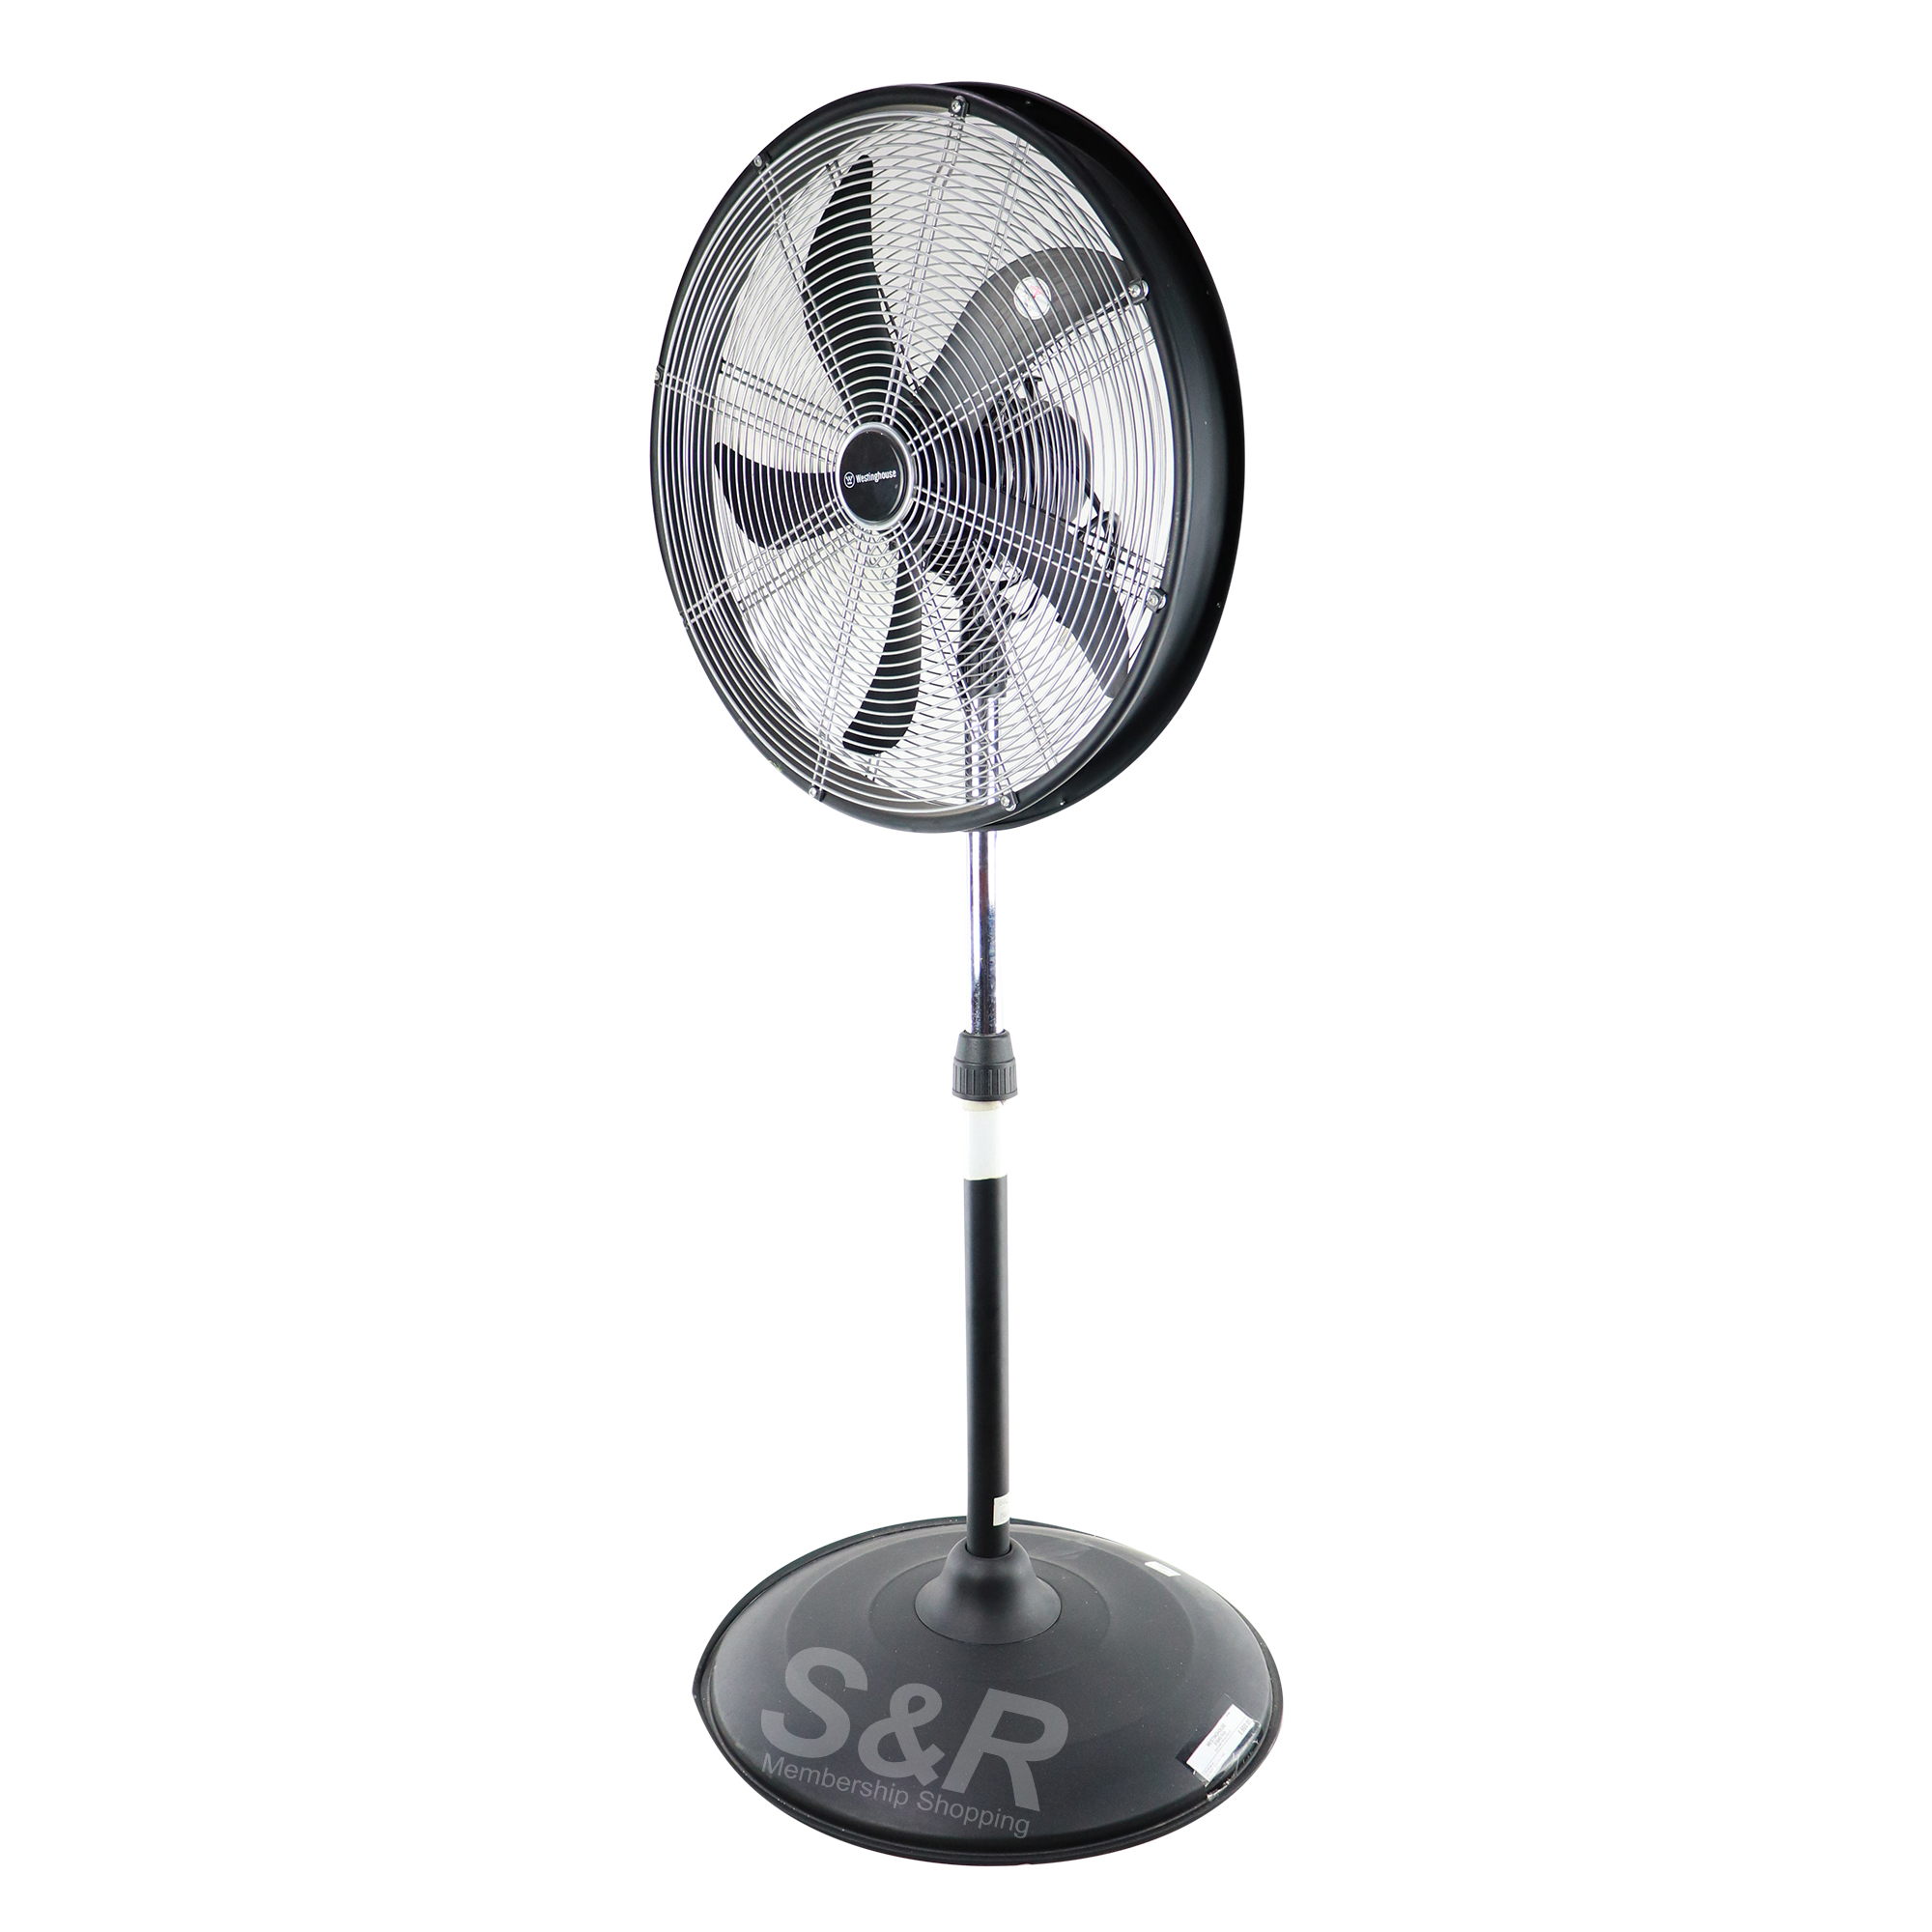 Westing House 20-inch Stand Fan WH2715